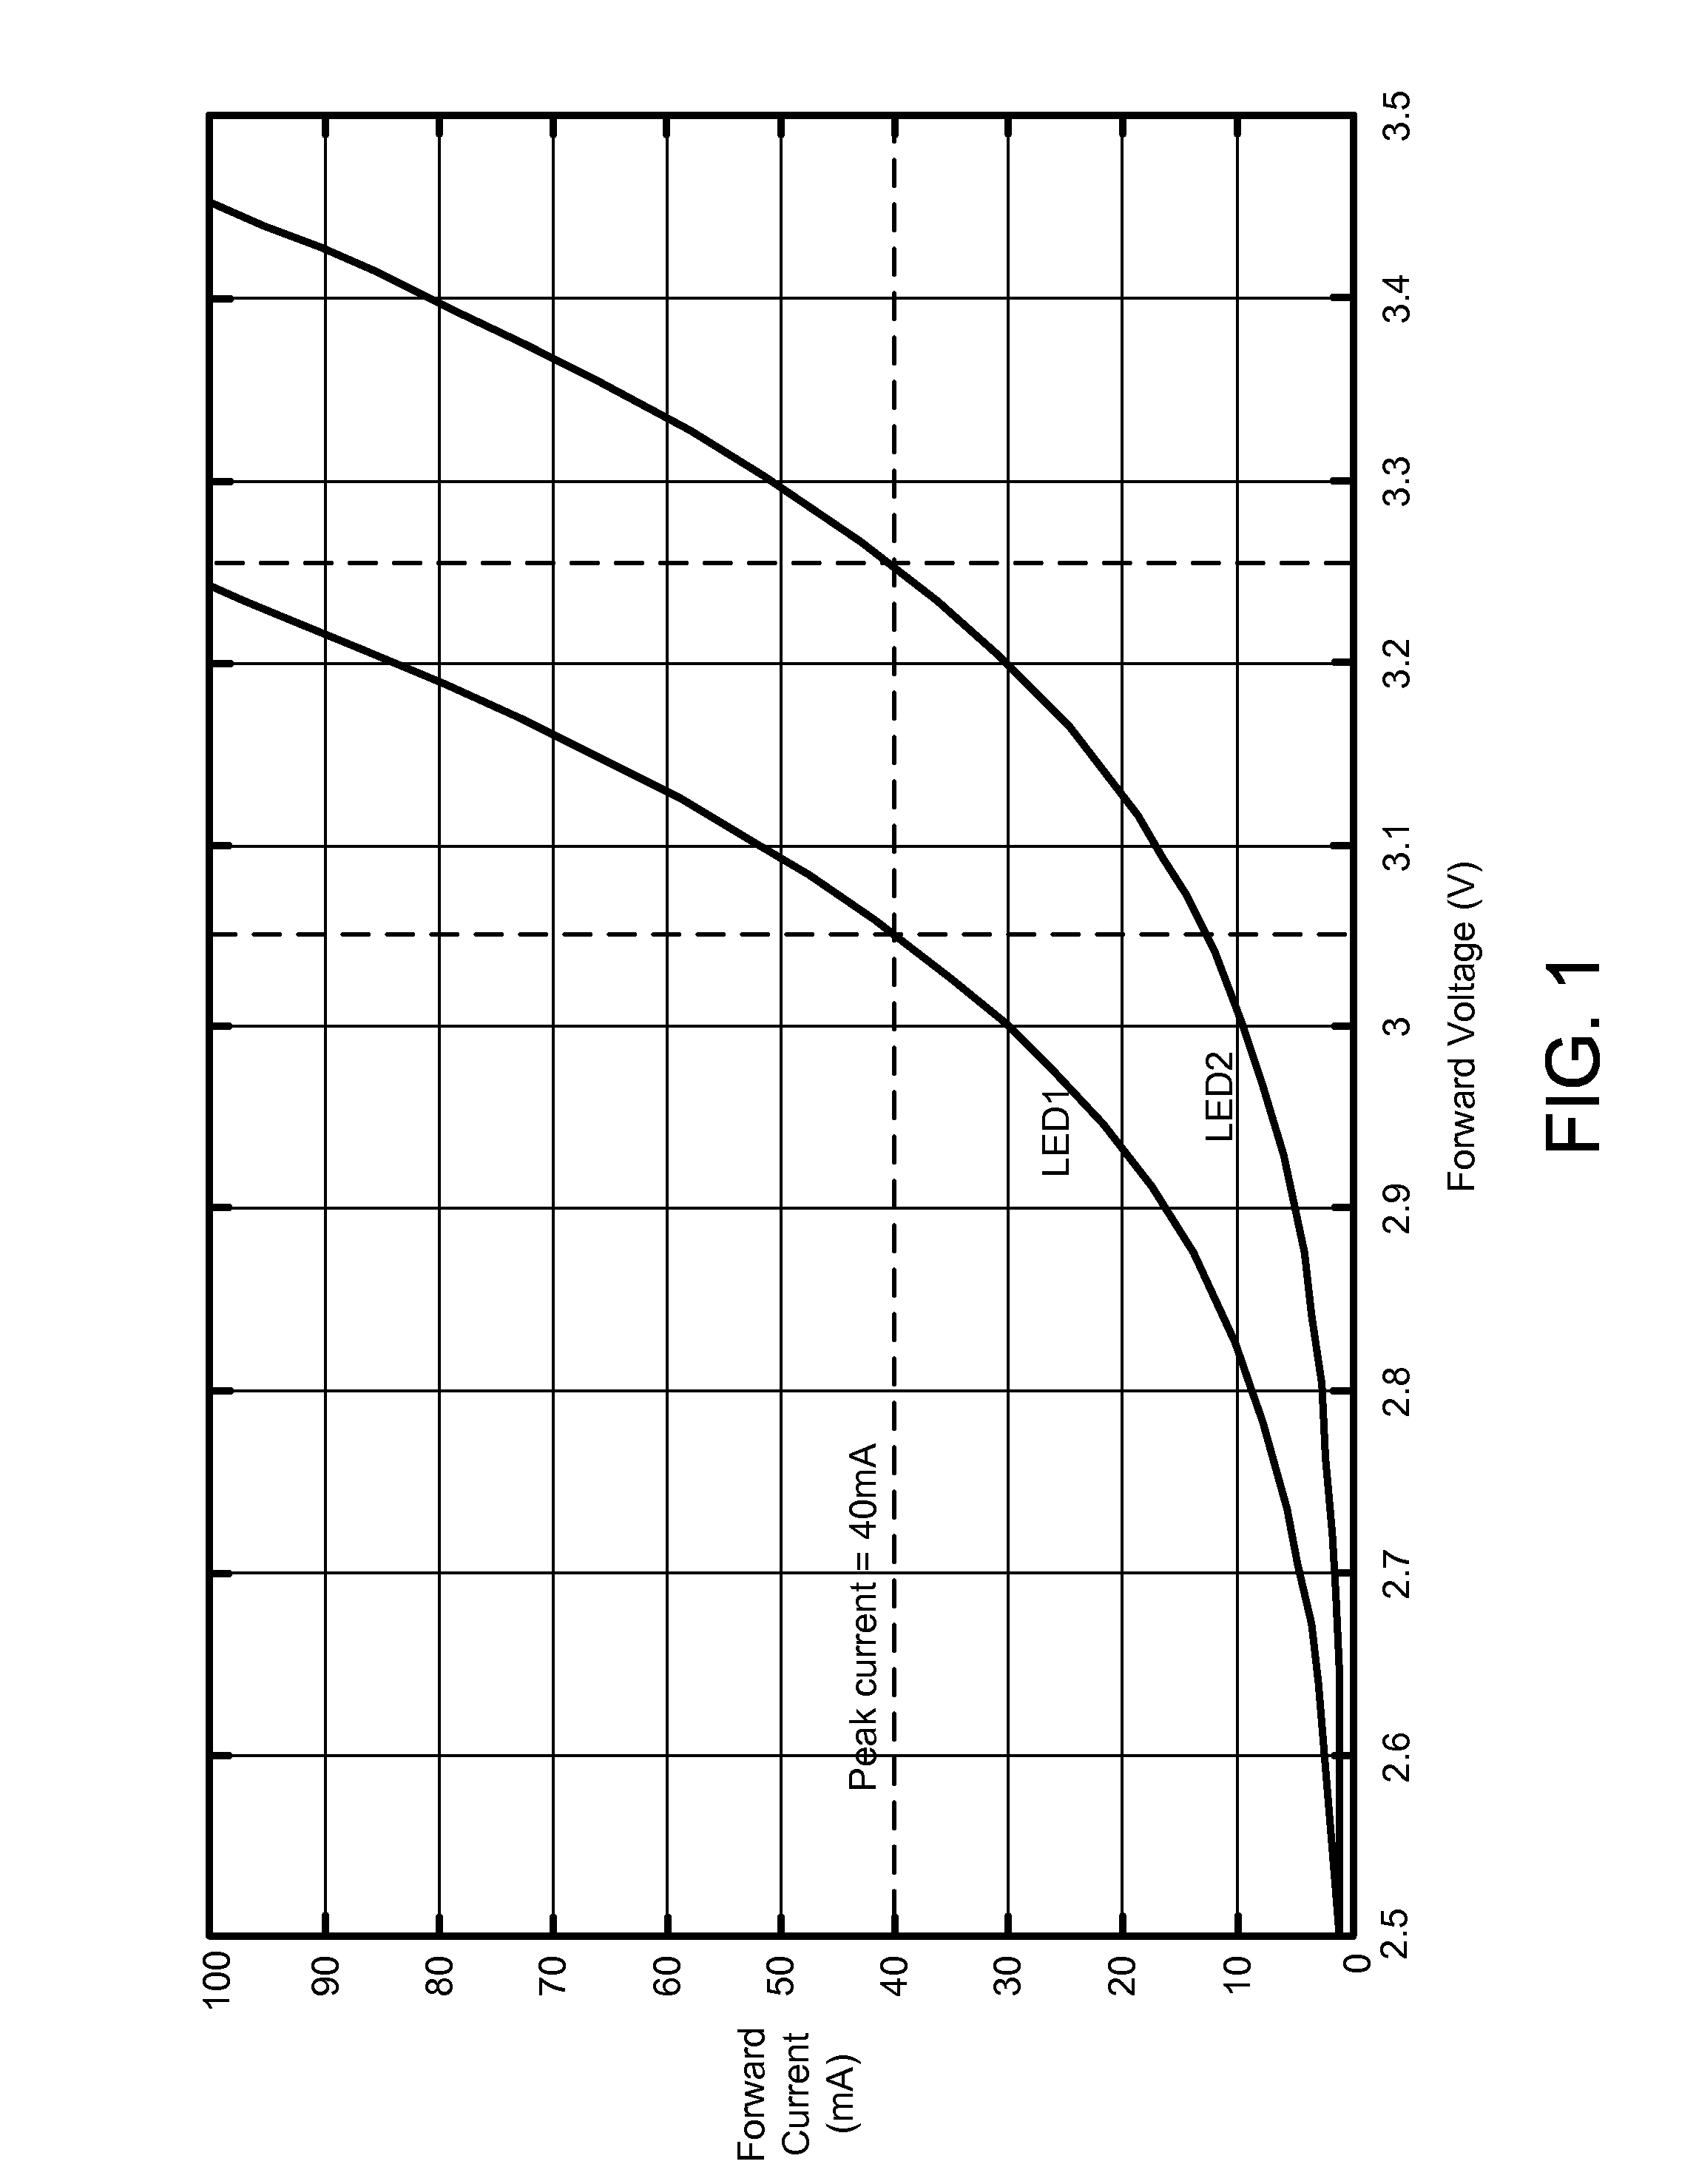 Predictive control of power converter for LED driver